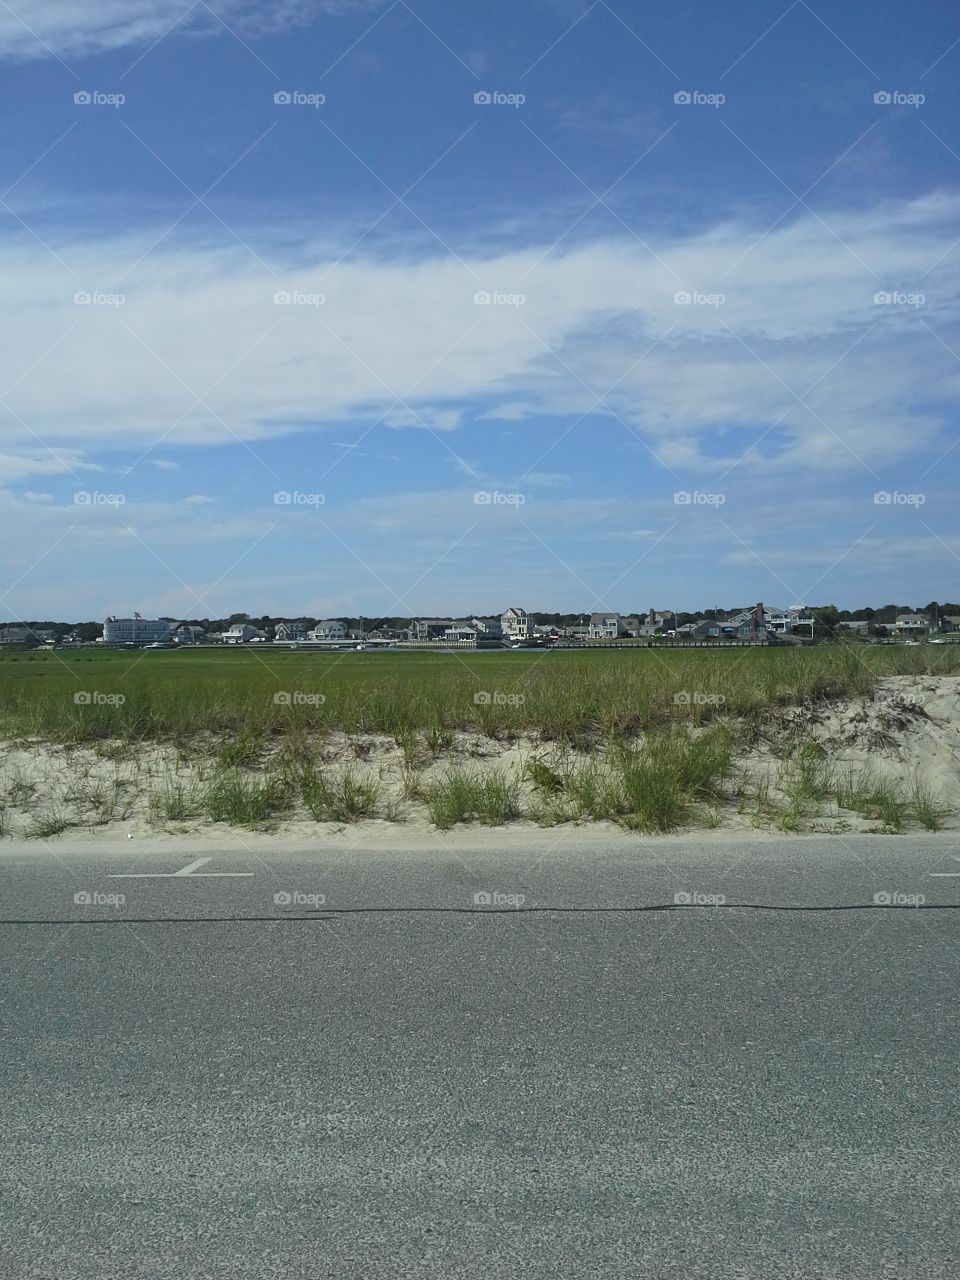 west dennis. these are the houses near west dennis beach